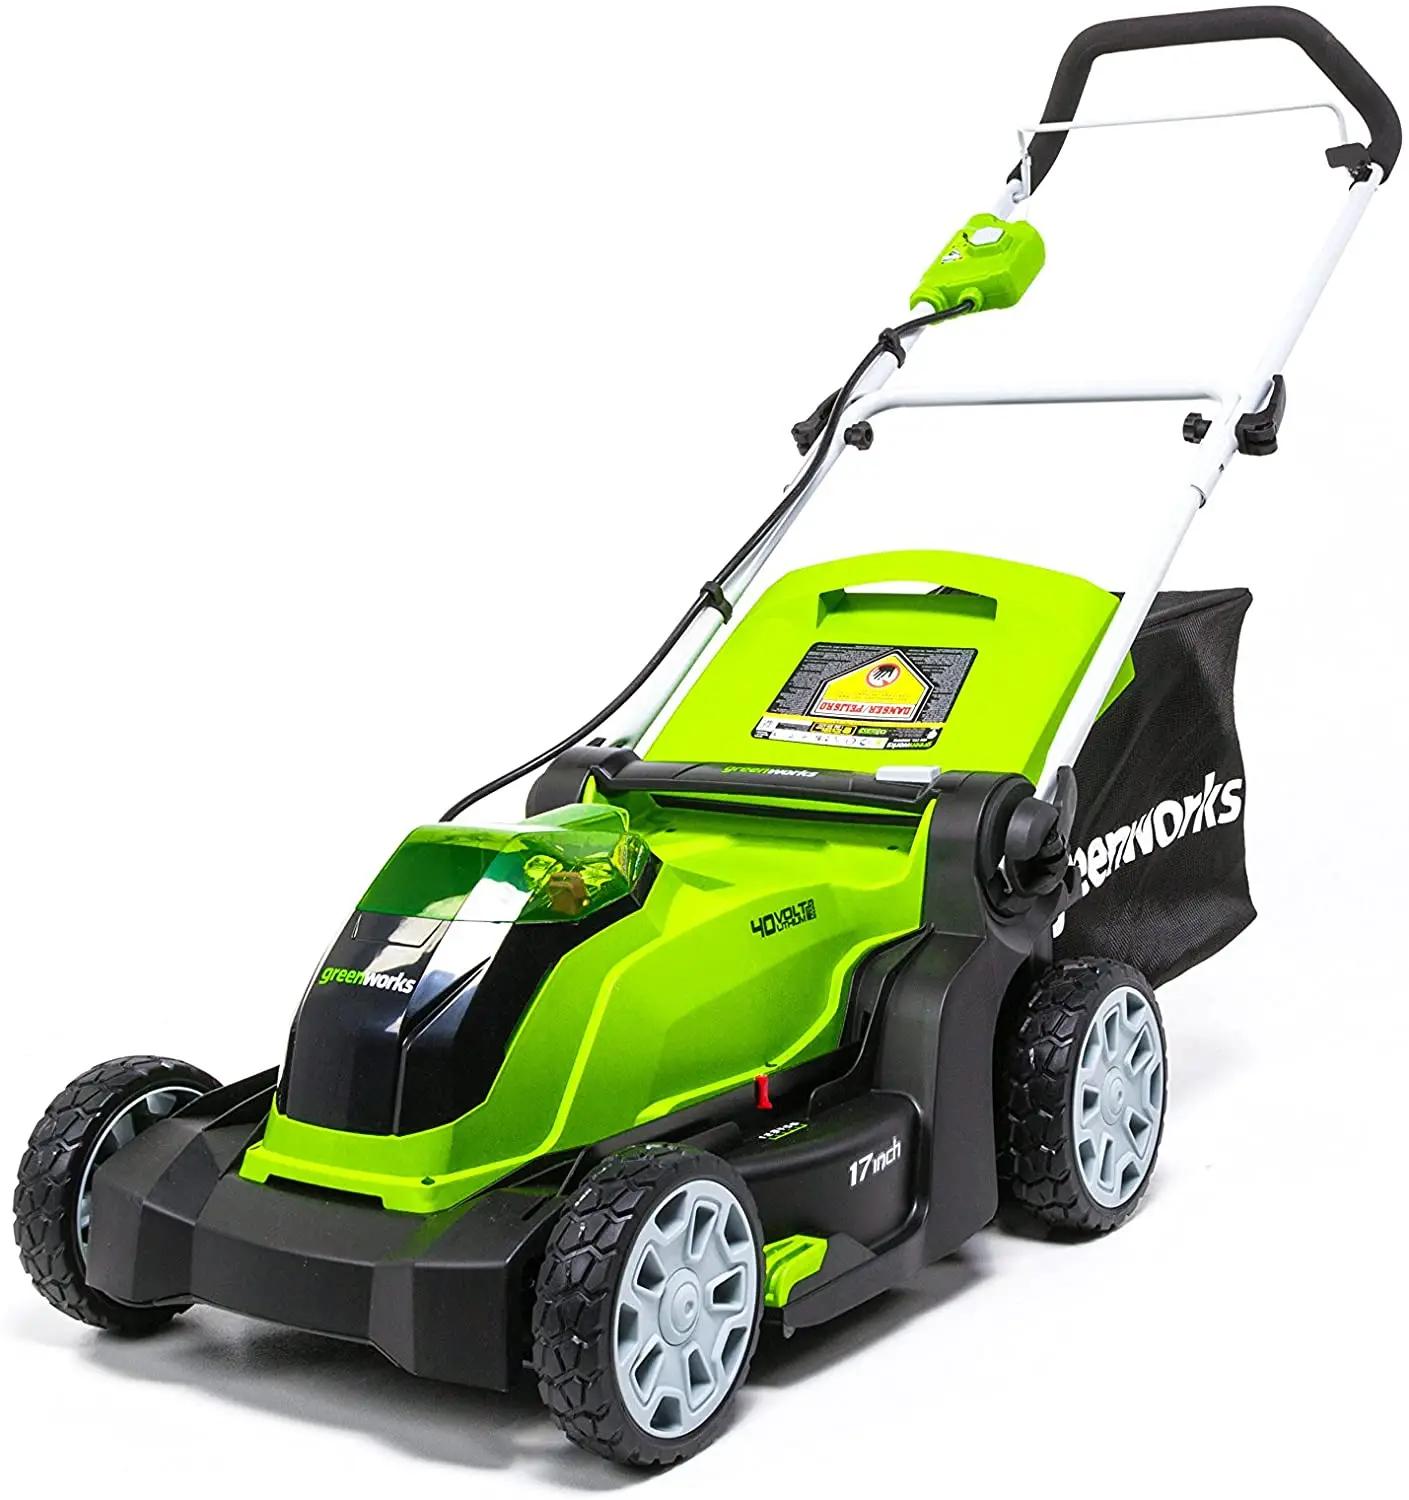 Top 10 Best Cordless Mower in 2021 Review